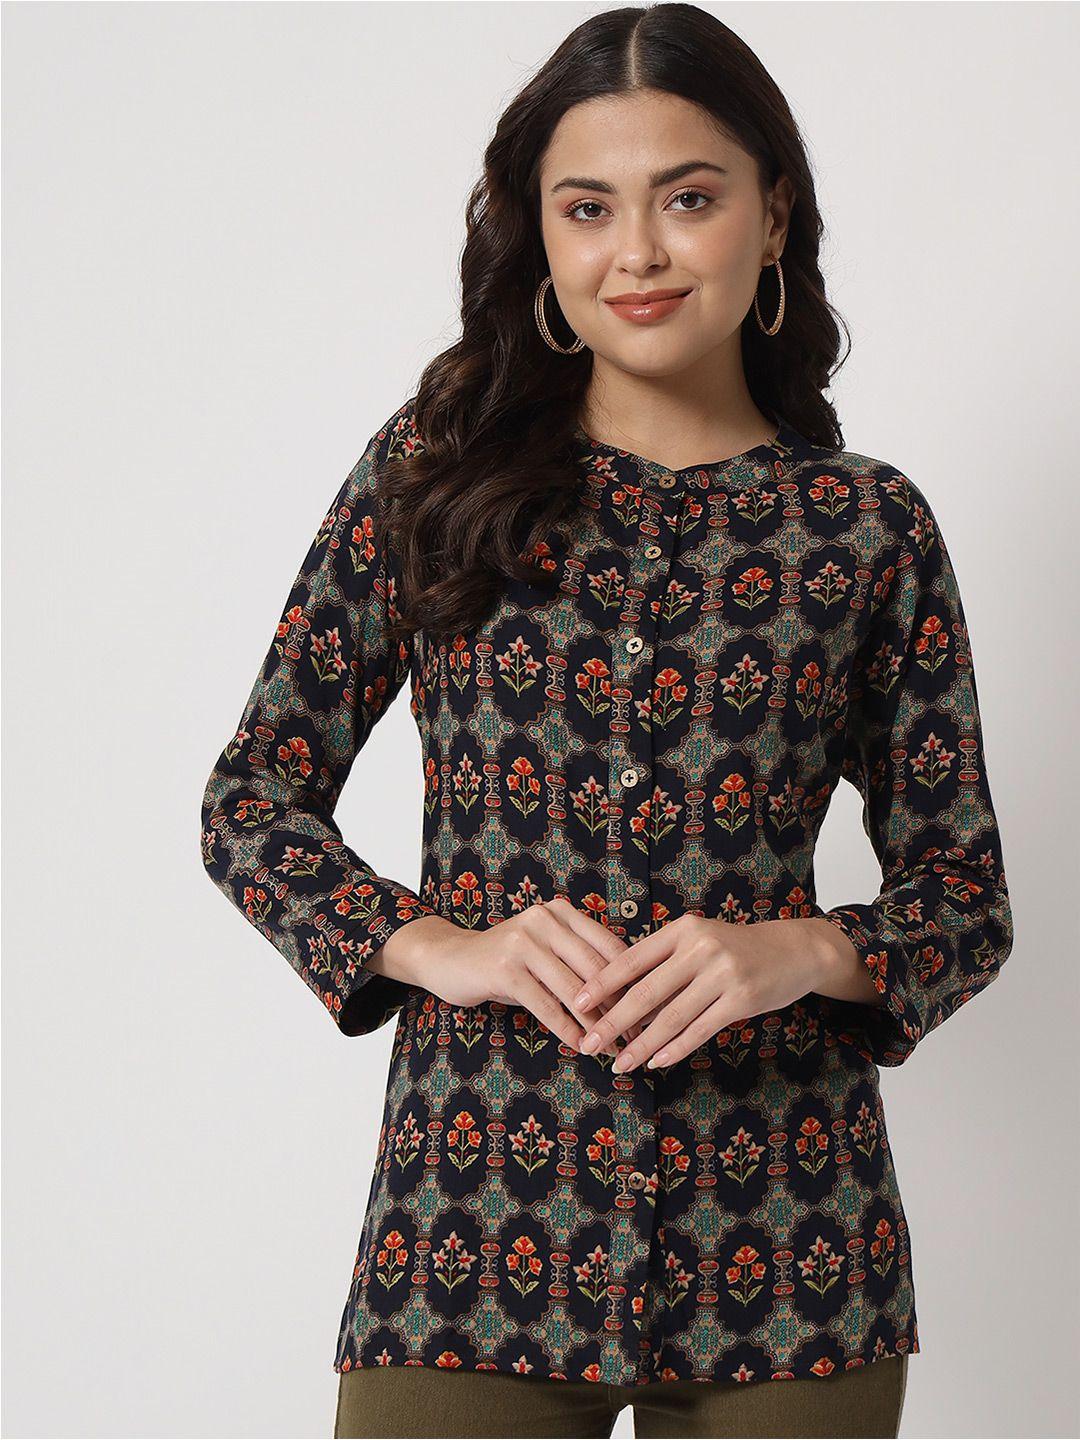 orchid hues women navy blue & orange floral printed pure cotton shirt style top